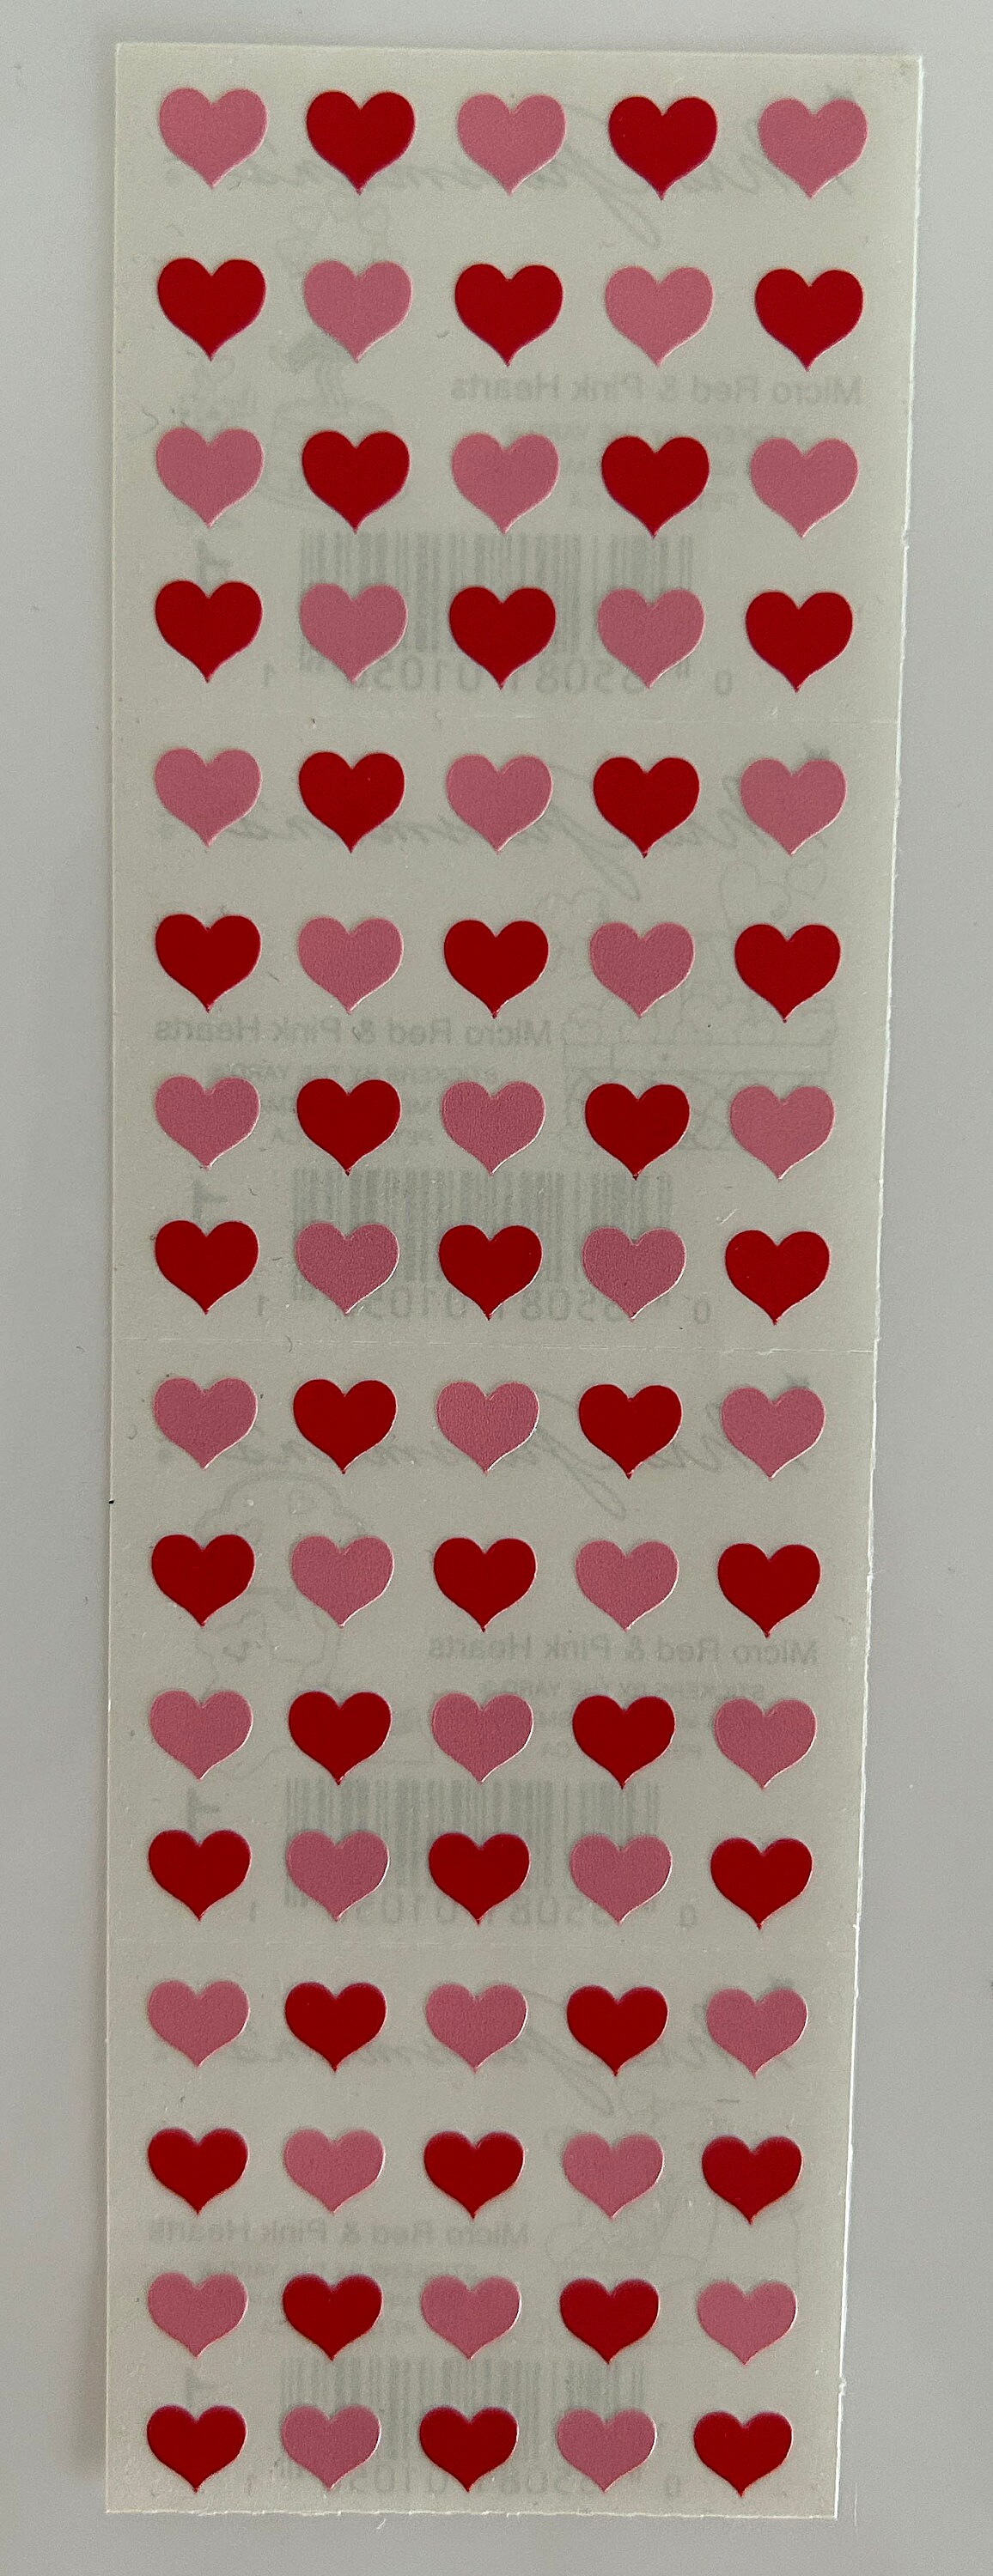 18 Sheets/1512 Pcs Colorful Small Heart Stickers Self Adhesive Mini Heart  Stickers for Scrapbooking Embellishment Valentine's Day Love Decorative